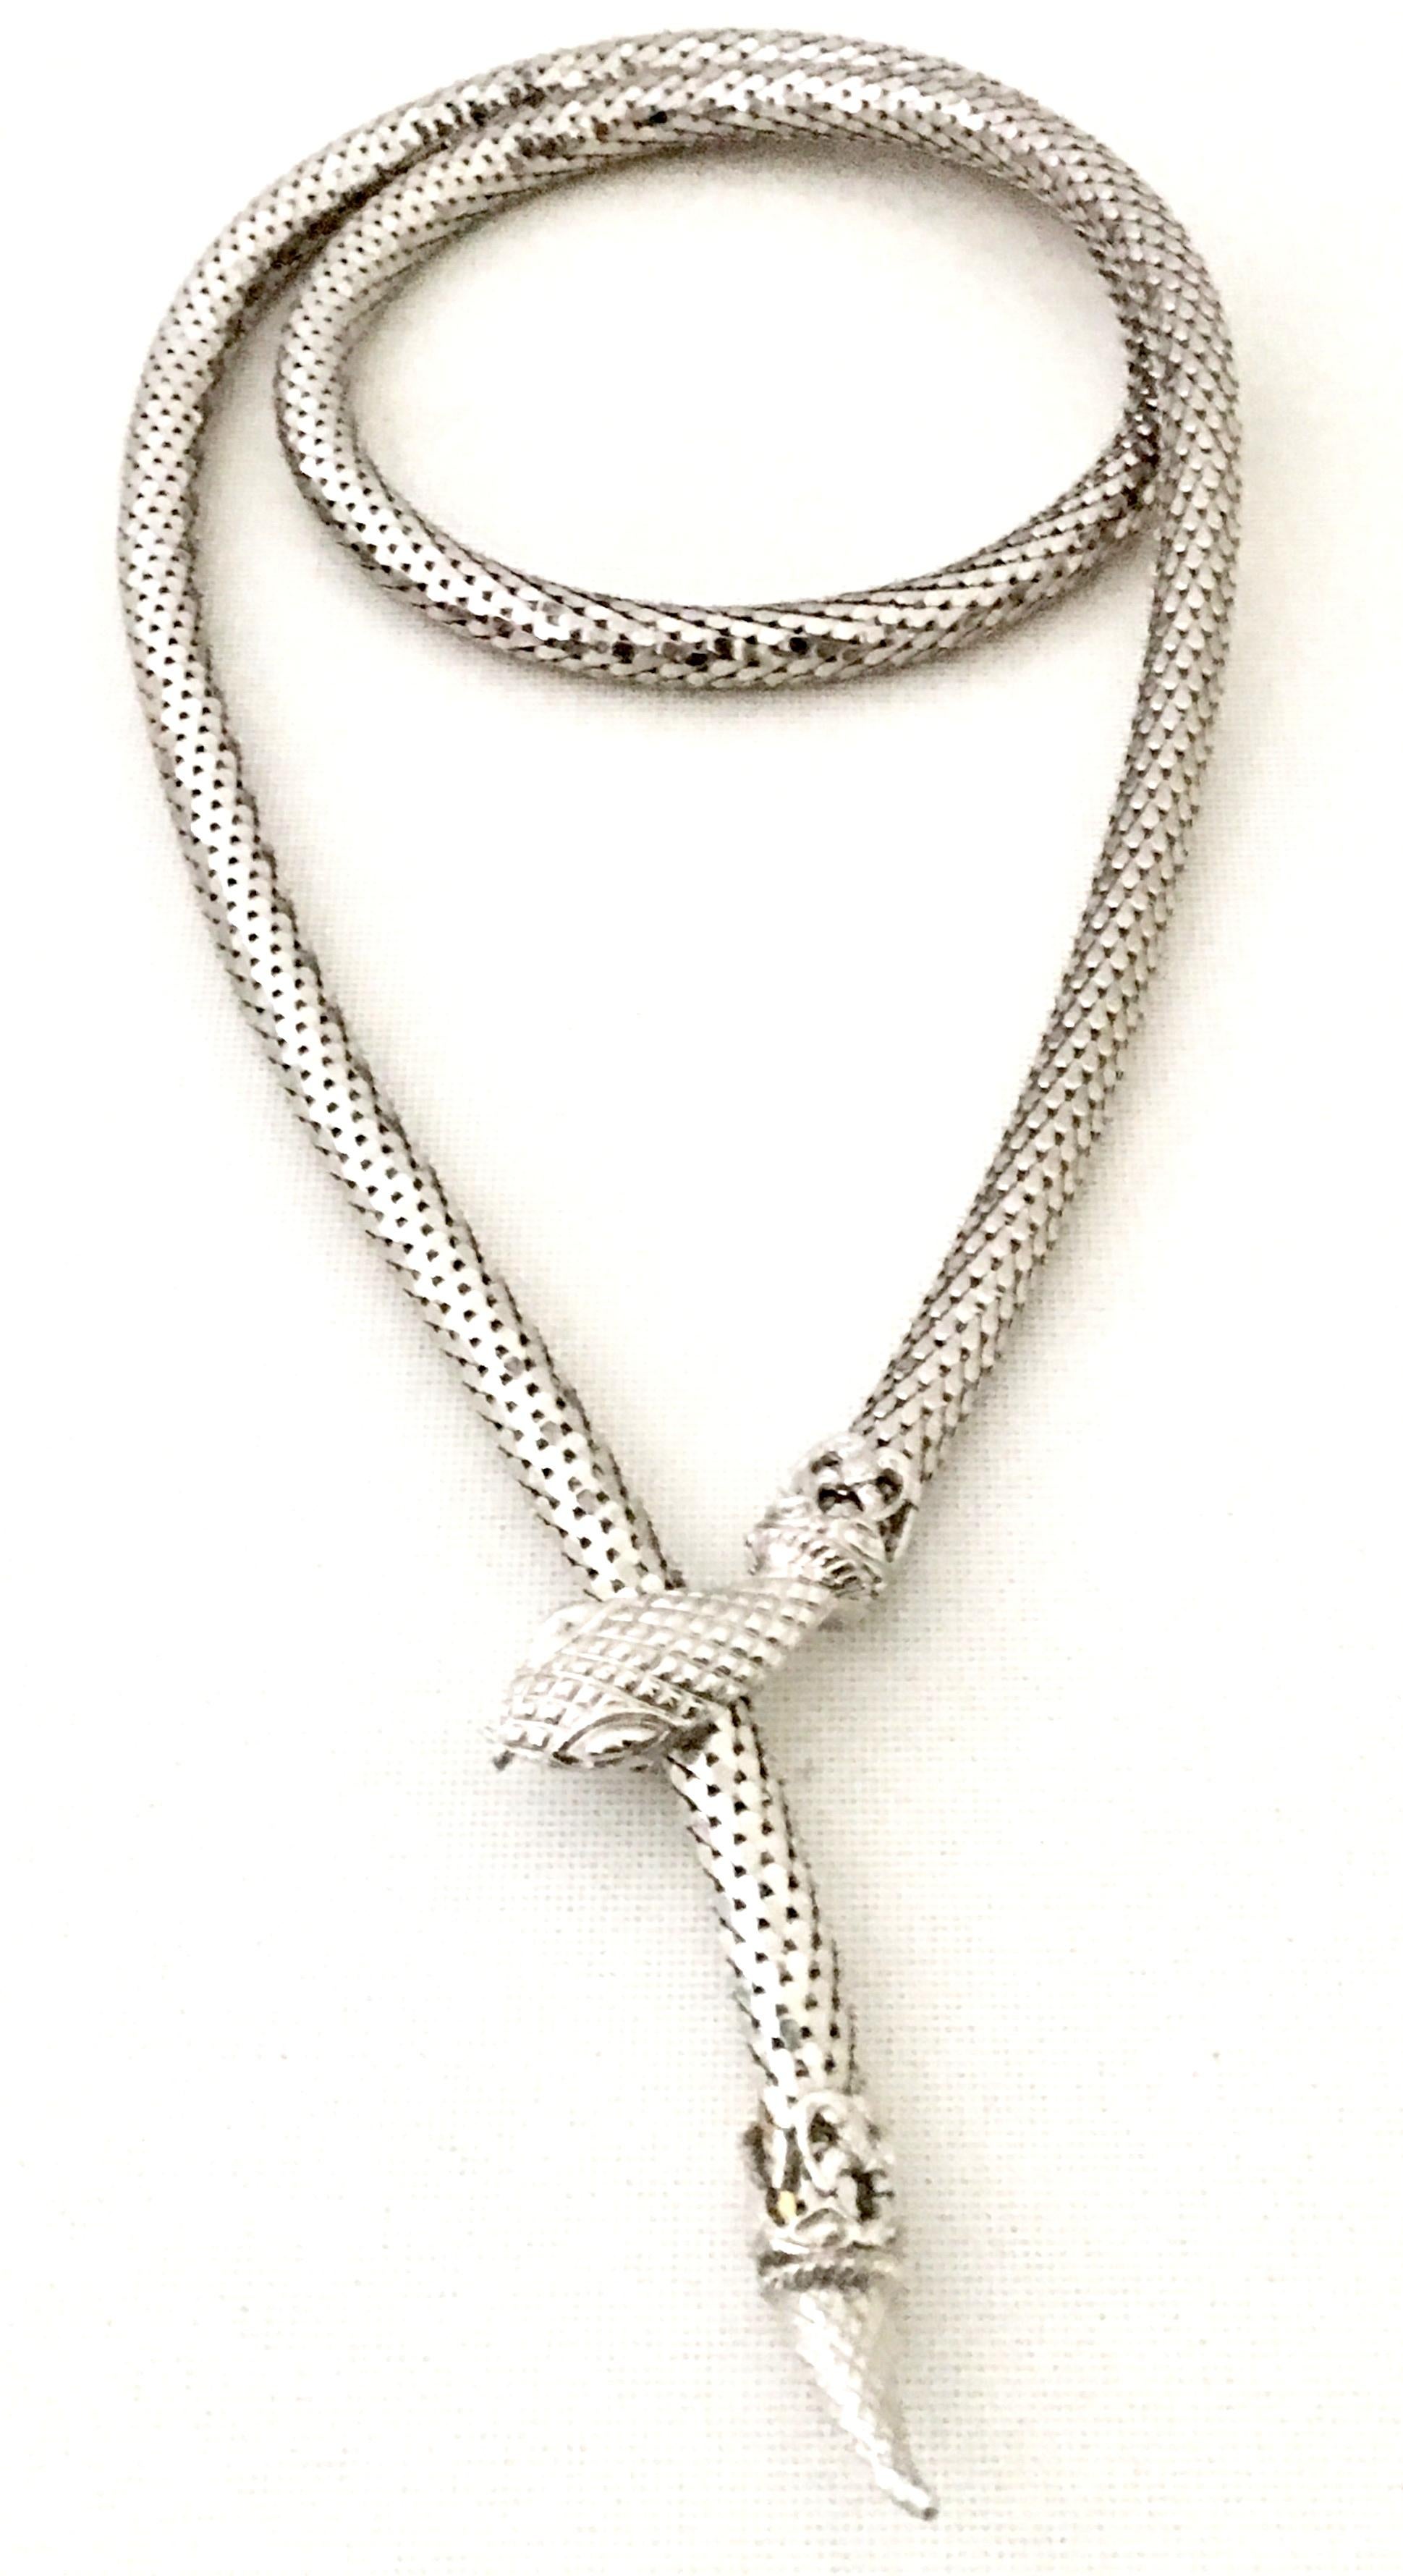 20th Century Silver Metal Mesh Snake Necklace Or Belt By, Whiting & Davis 1